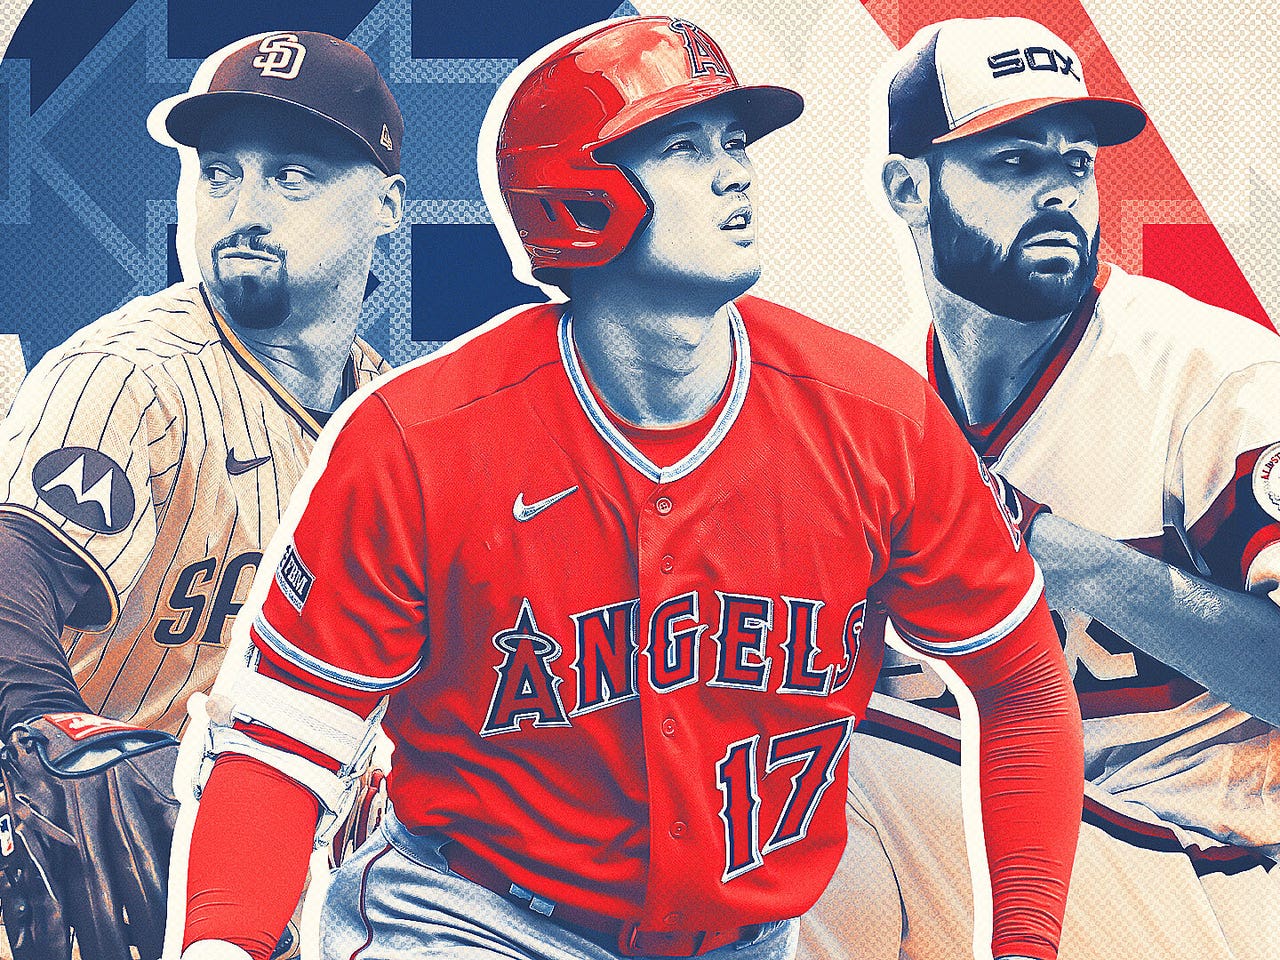 Your guide to the chaos -- The moves that rocked the MLB offseason